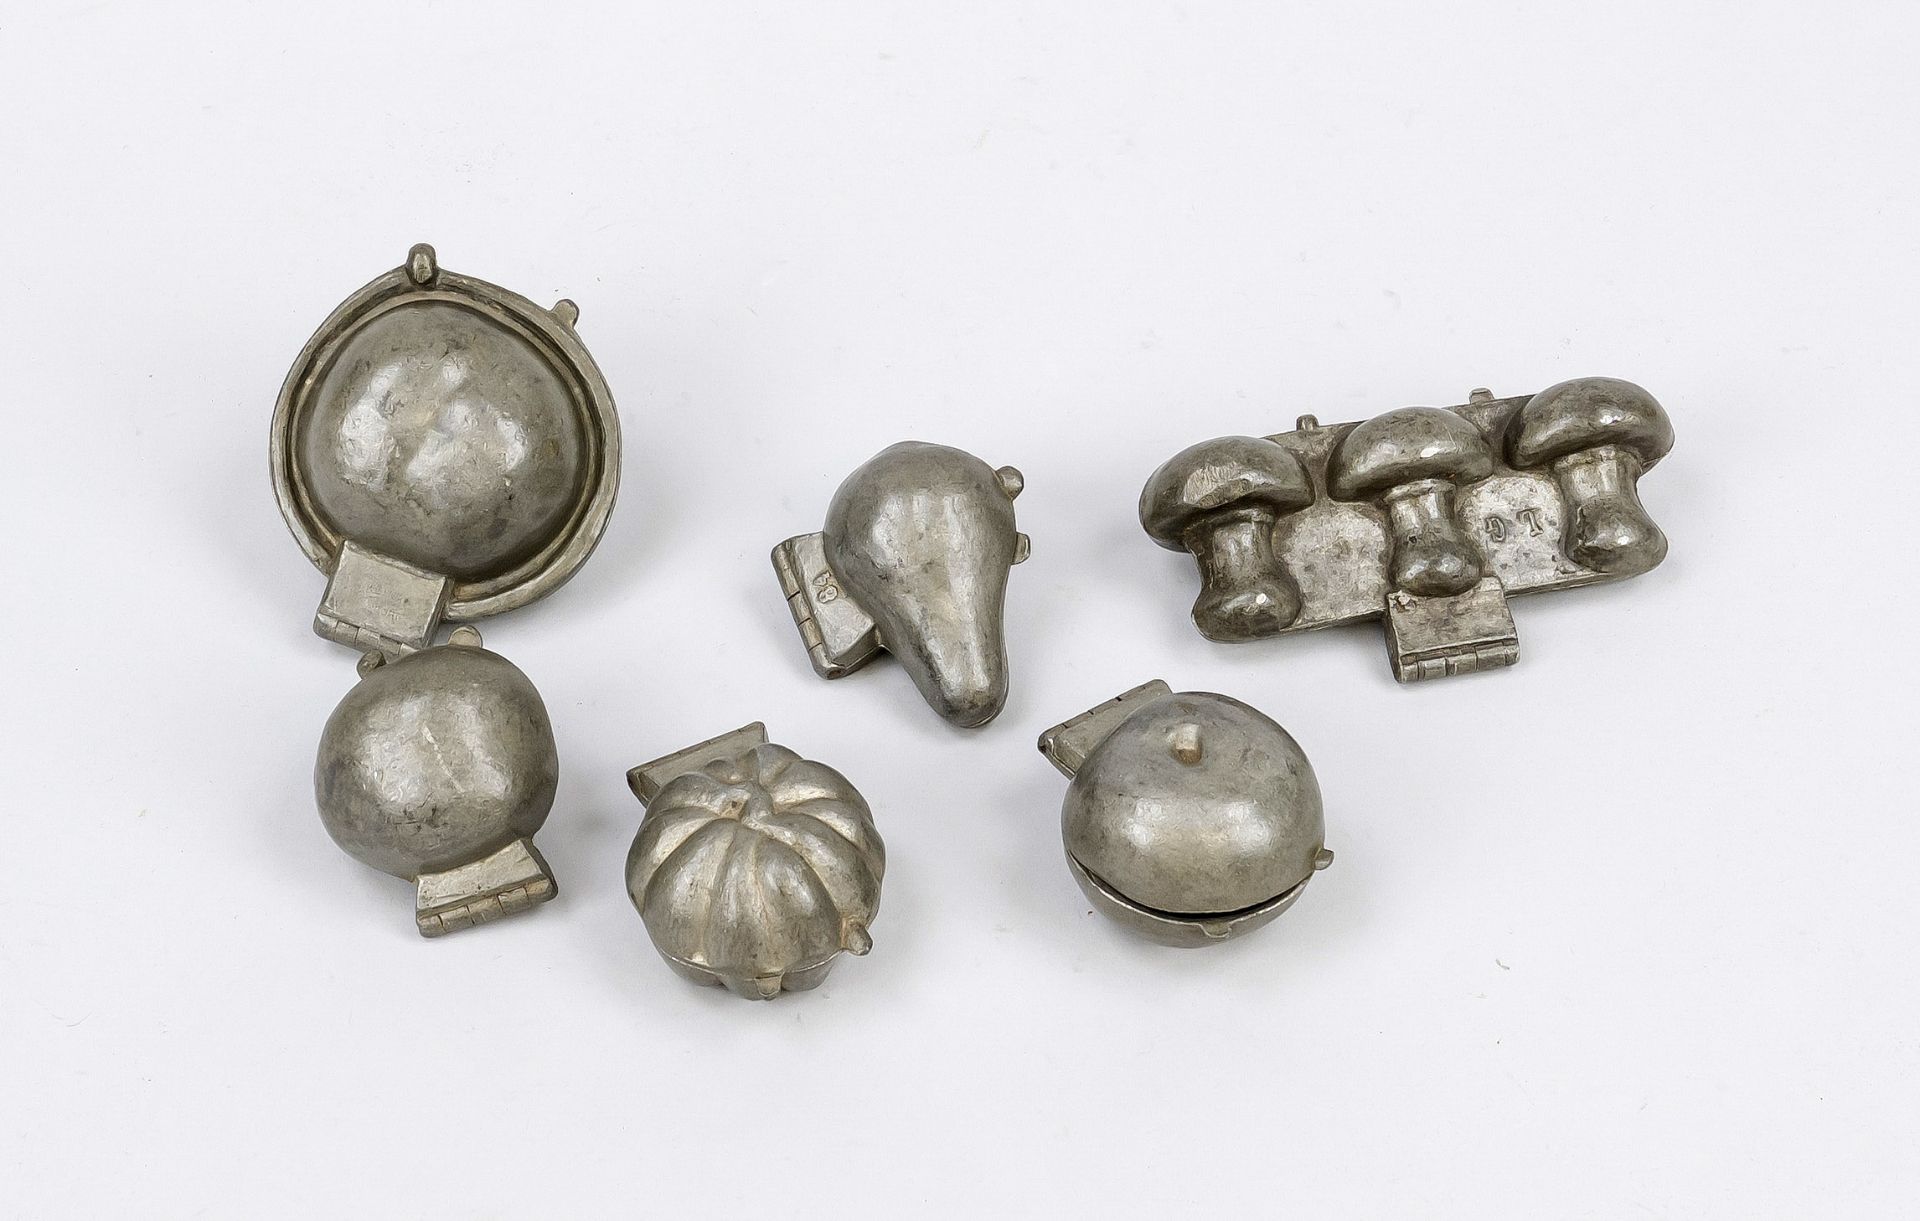 6 chocolate molds, around 1900, pewter. Each with hinged joint. Various molds, different makers.